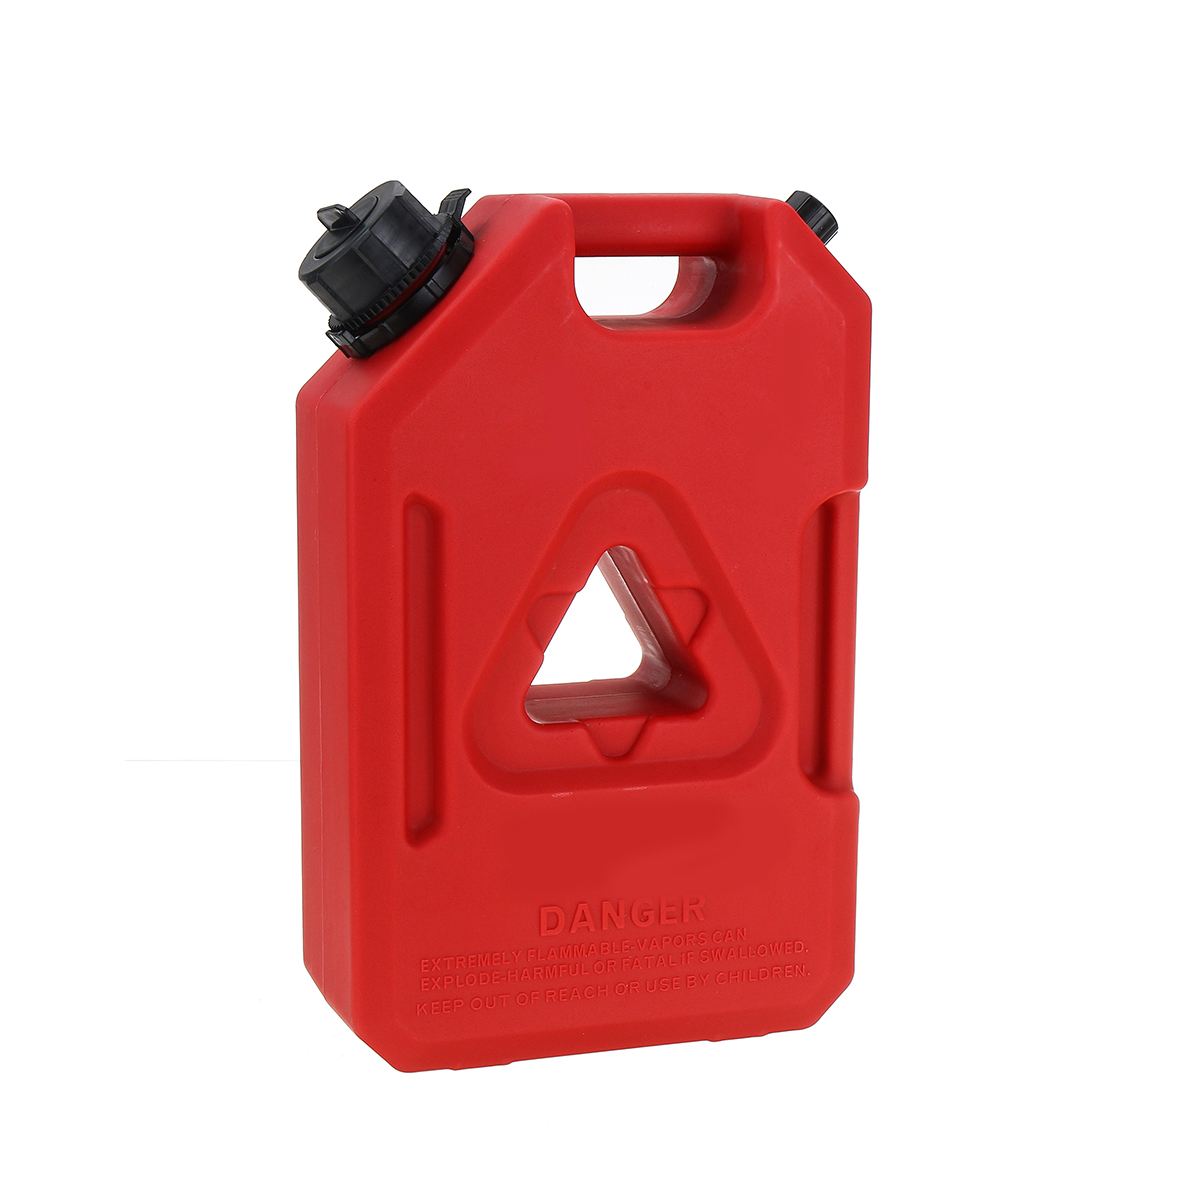 Rotomolding petrol jerry can military-spec fuel tank army gasoline diesel storage container